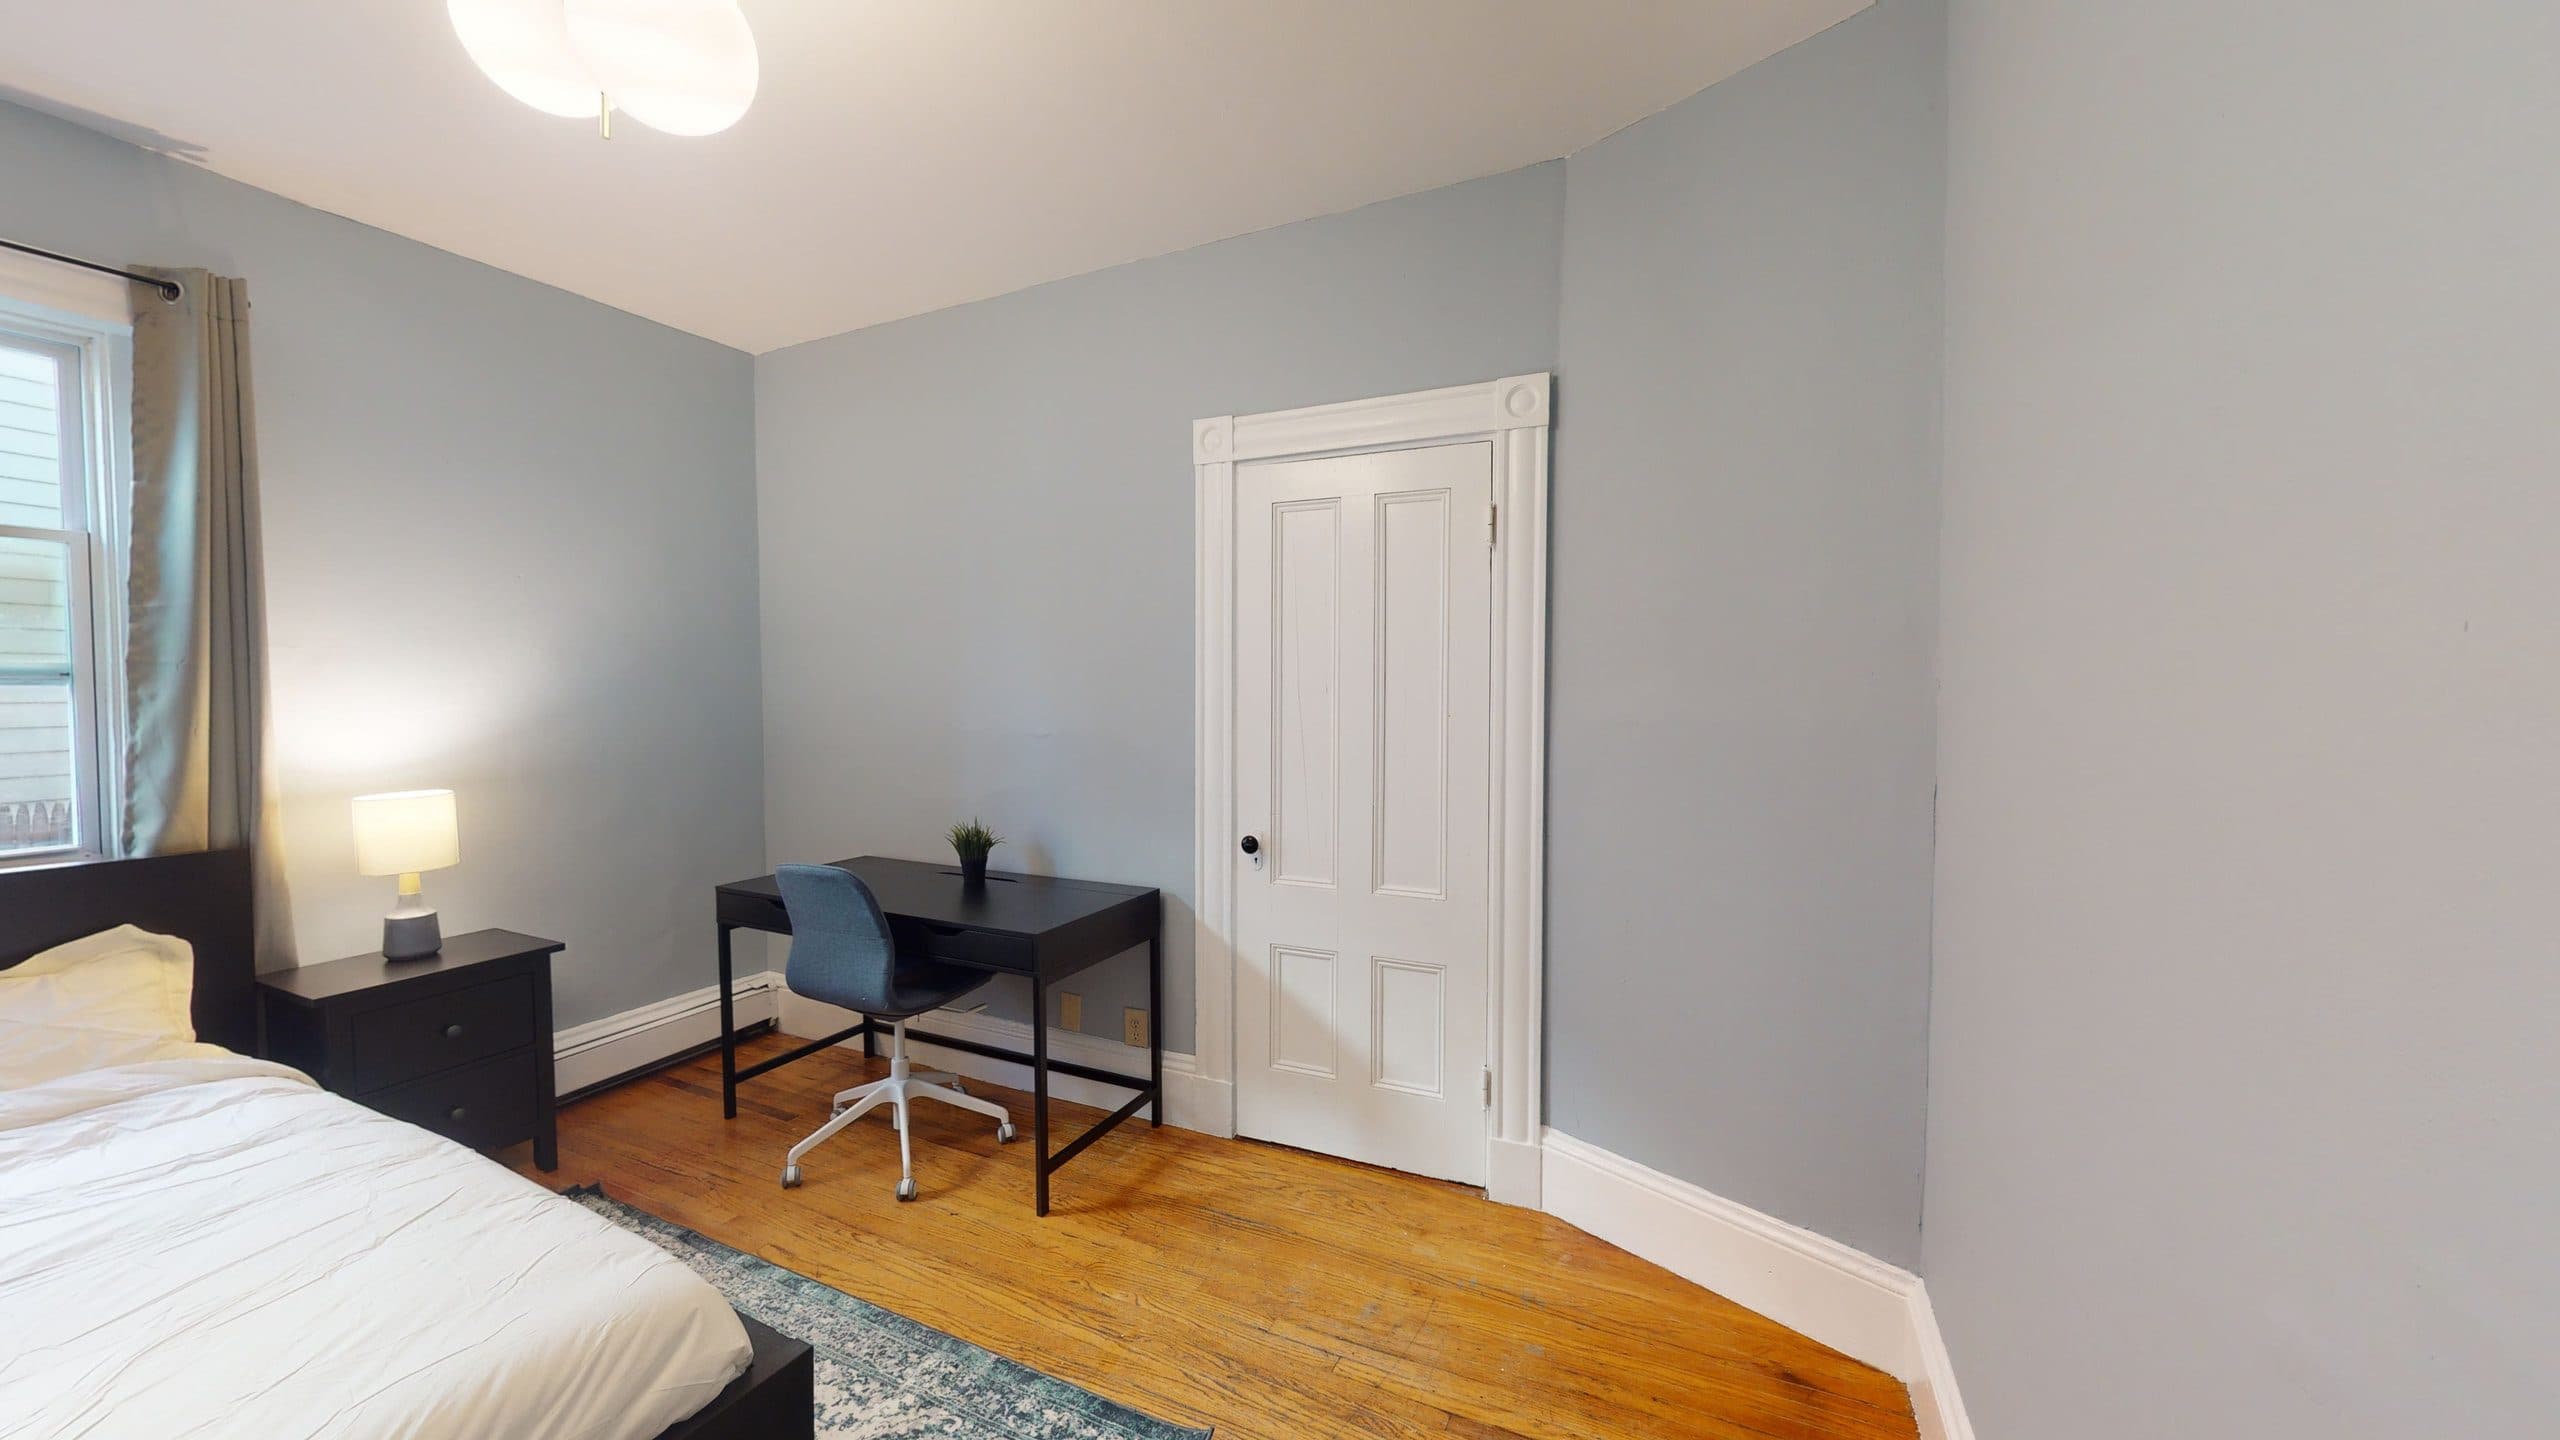 Photo 20 of #1126: Queen Bedroom A at June Homes